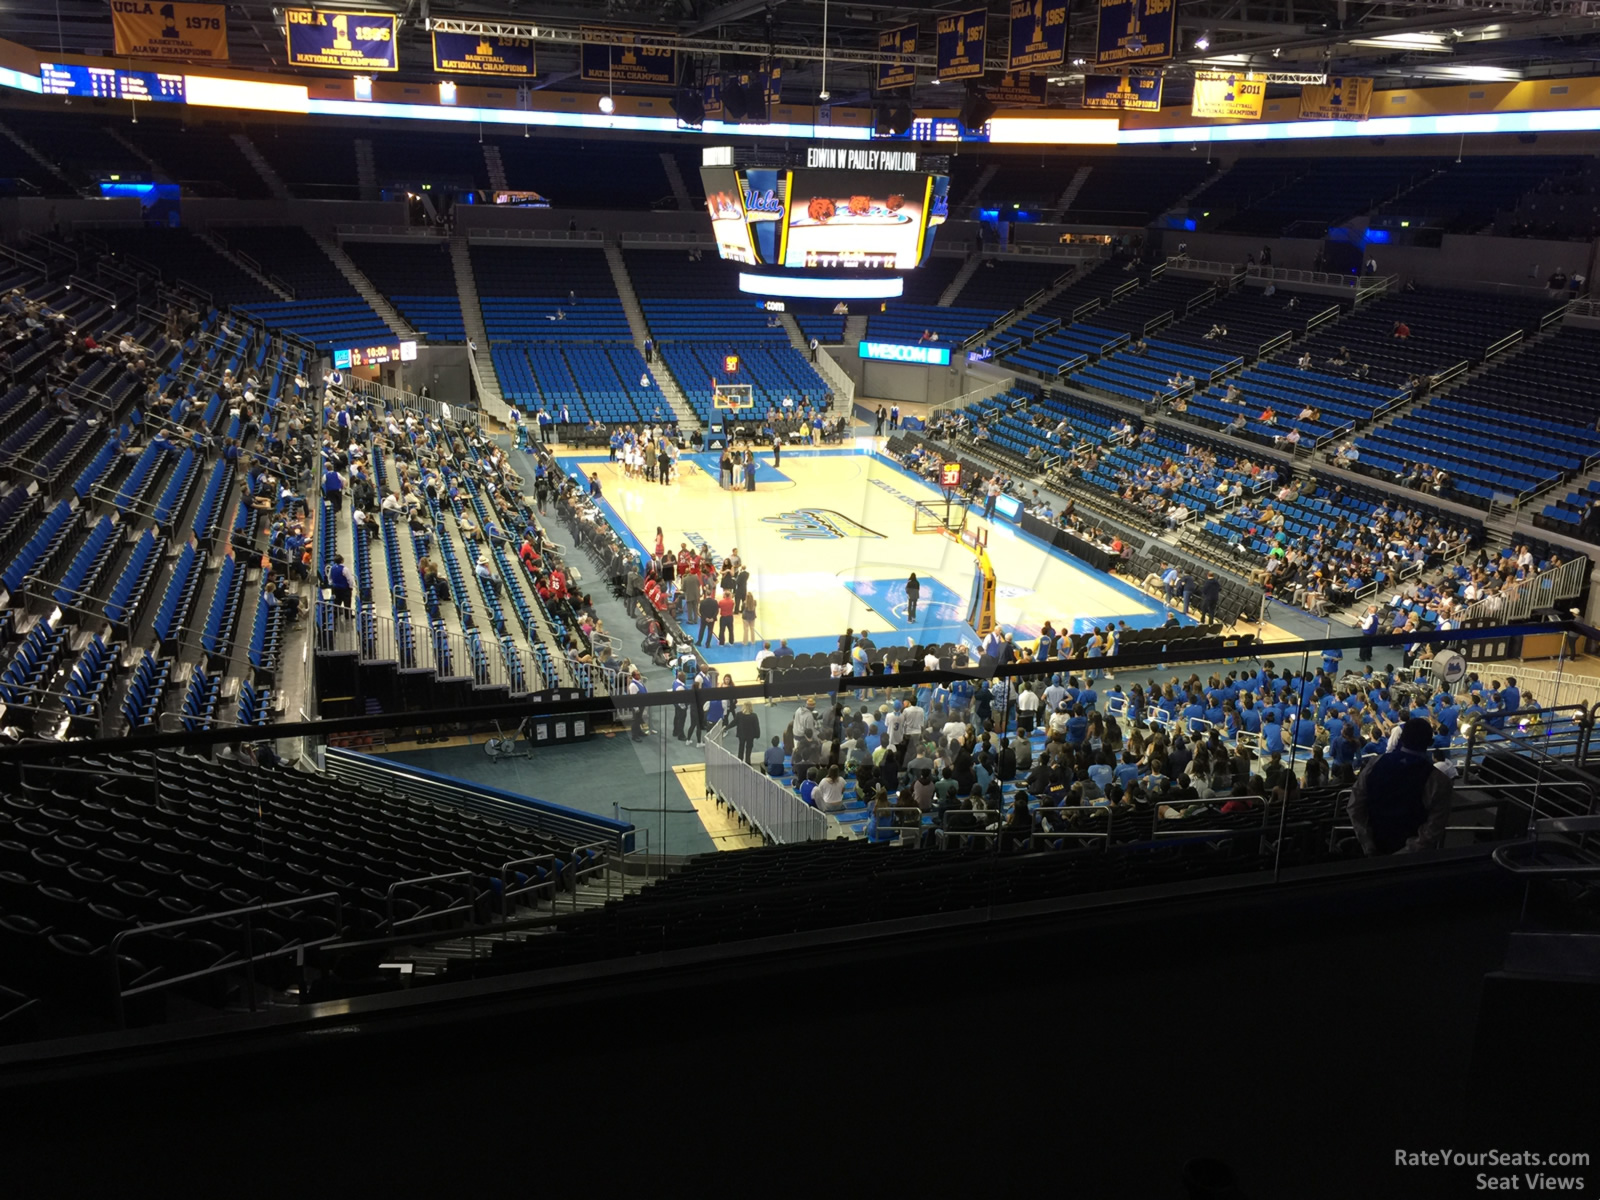 section 223b, row 6 seat view  - pauley pavilion